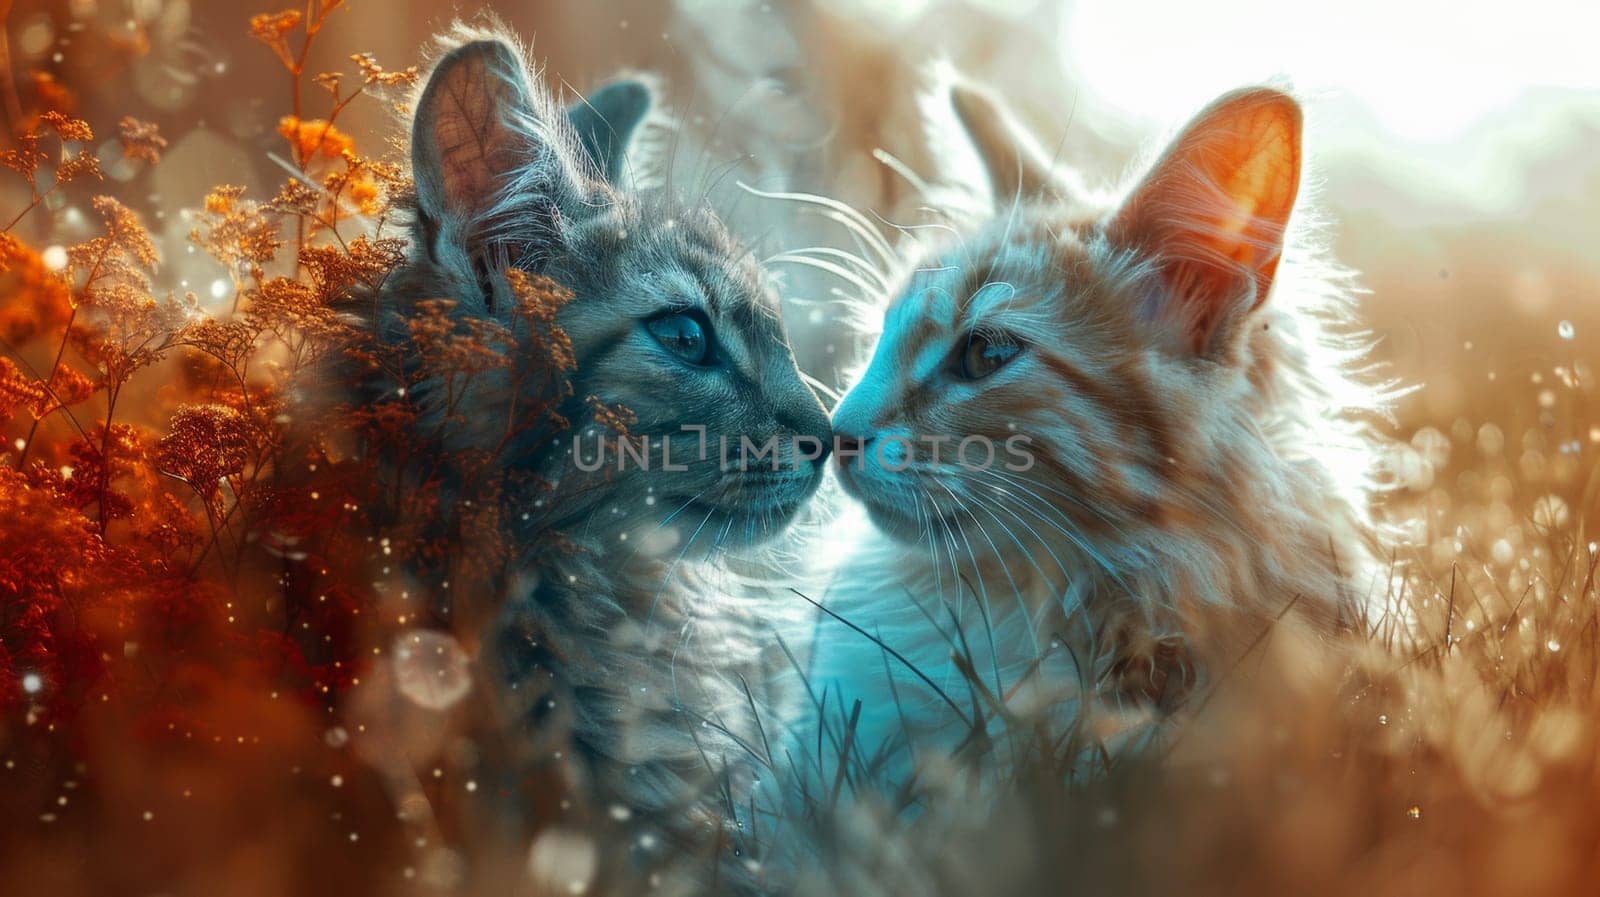 Two cats are kissing each other in a field of flowers